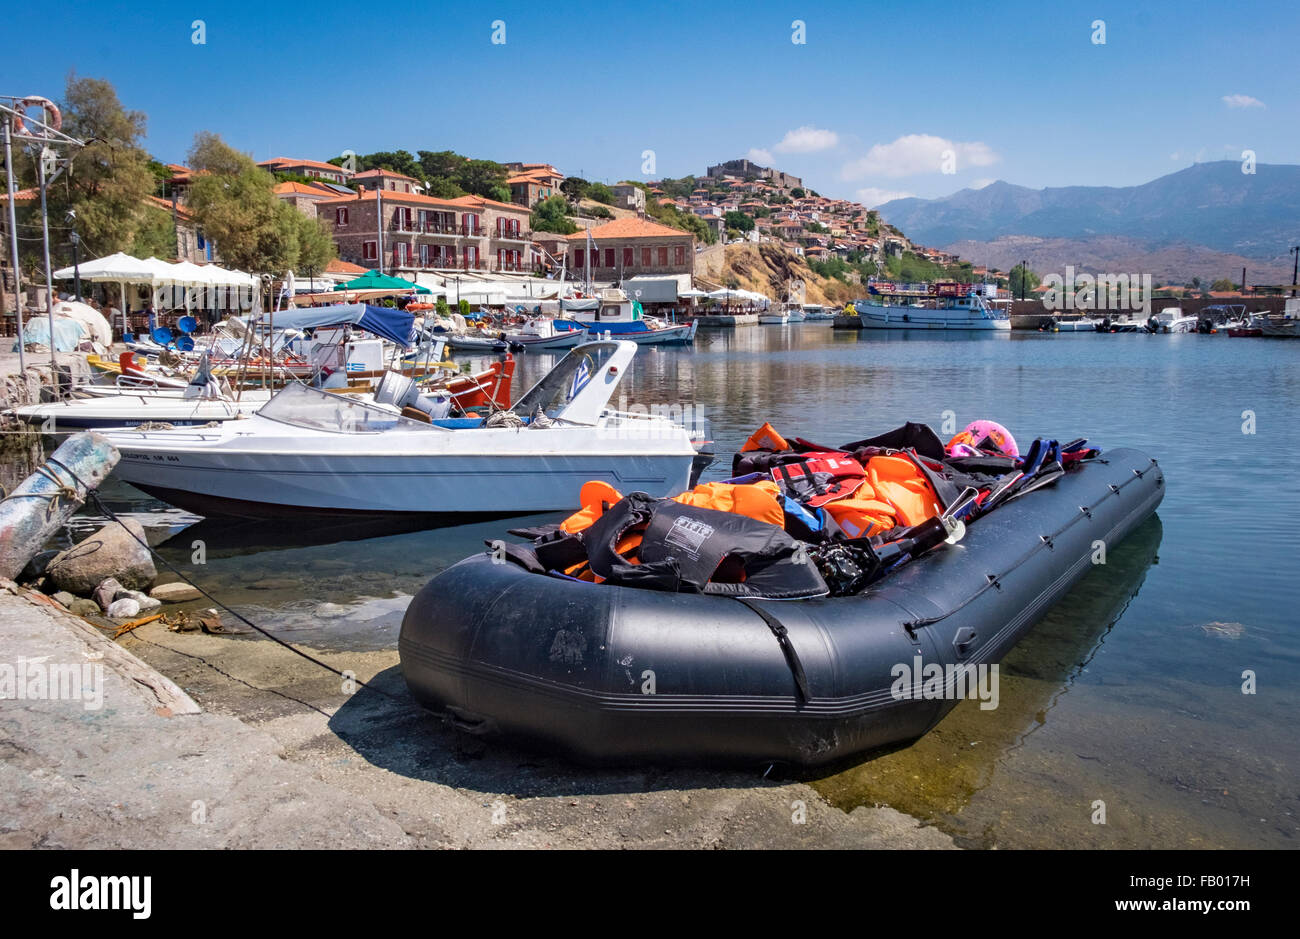 Rescued refugee raft/dinghy filled with life vests and tied up in Molyvos harbor next to pleasure boats. Stock Photo